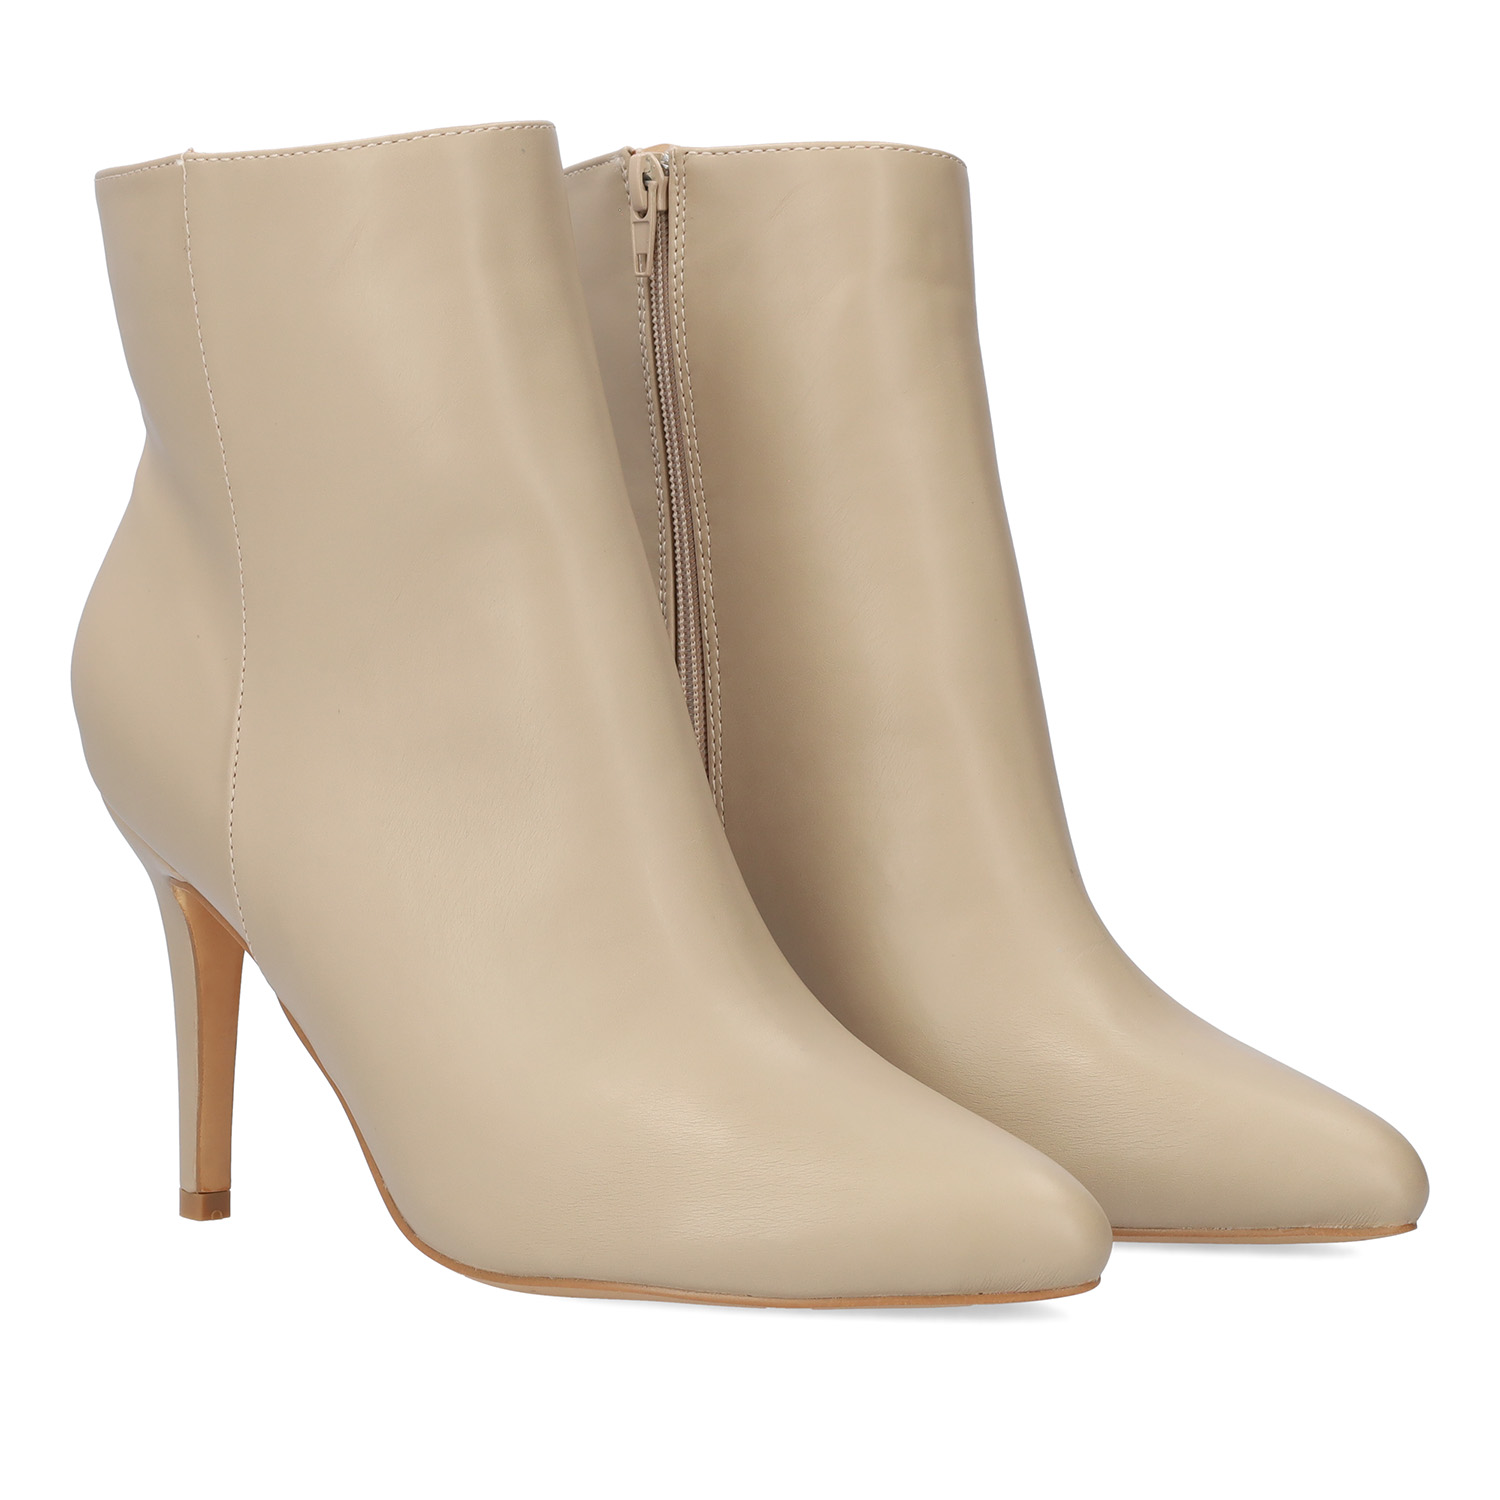 High-heeled booties in ivory faux leather